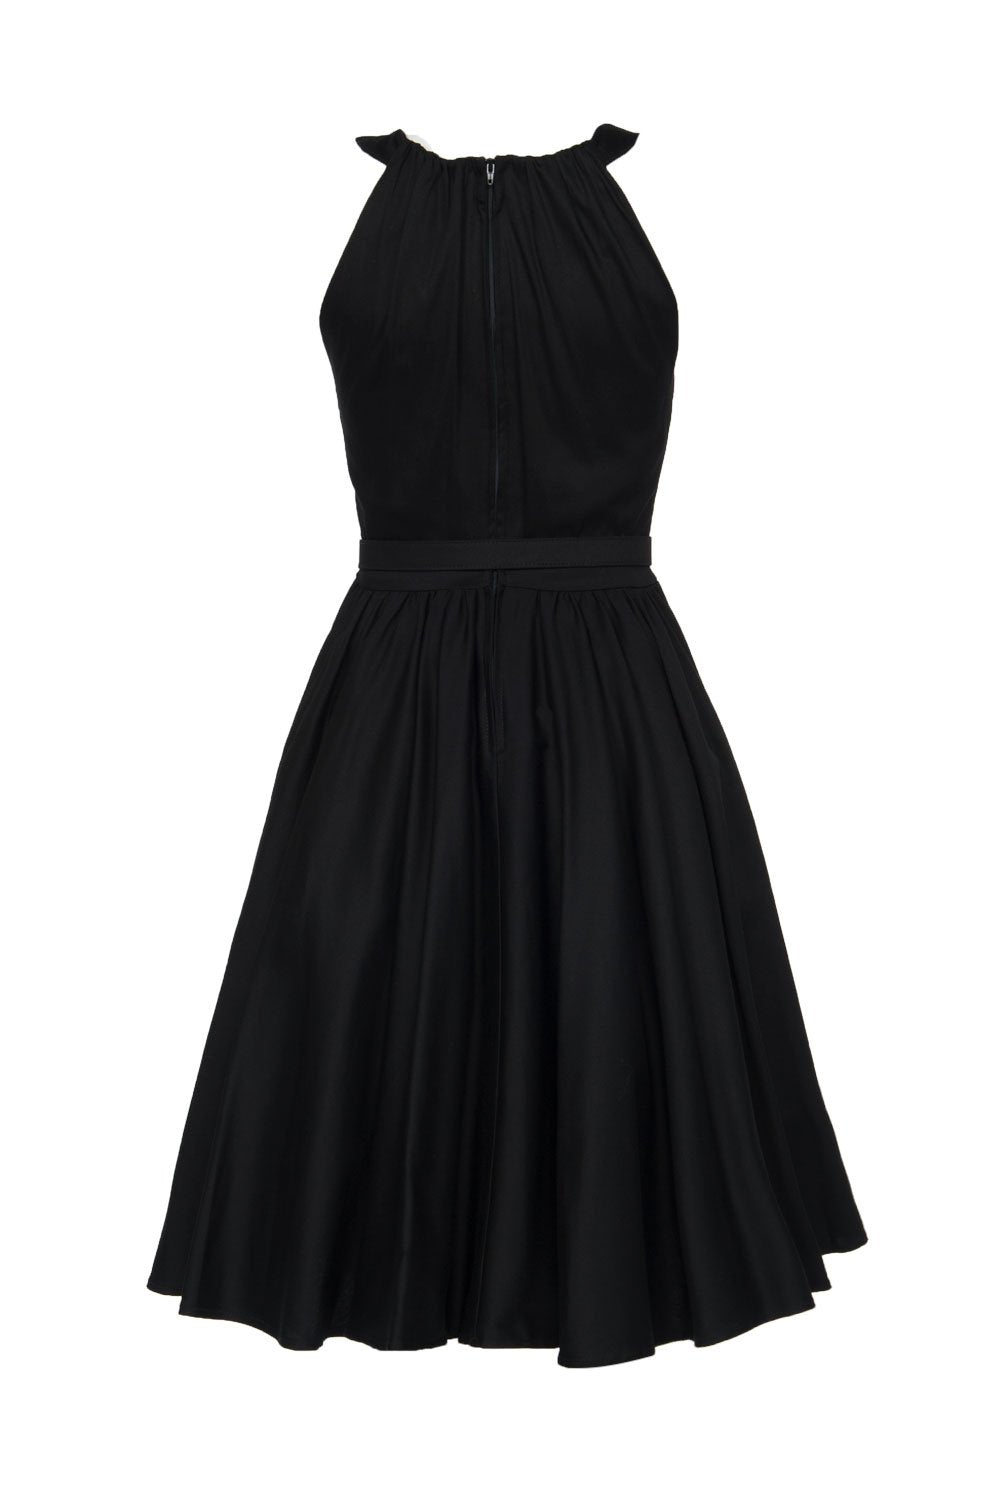 Pinup Couture Harley Retro Dress in Black Sateen – pinupgirlclothing.com